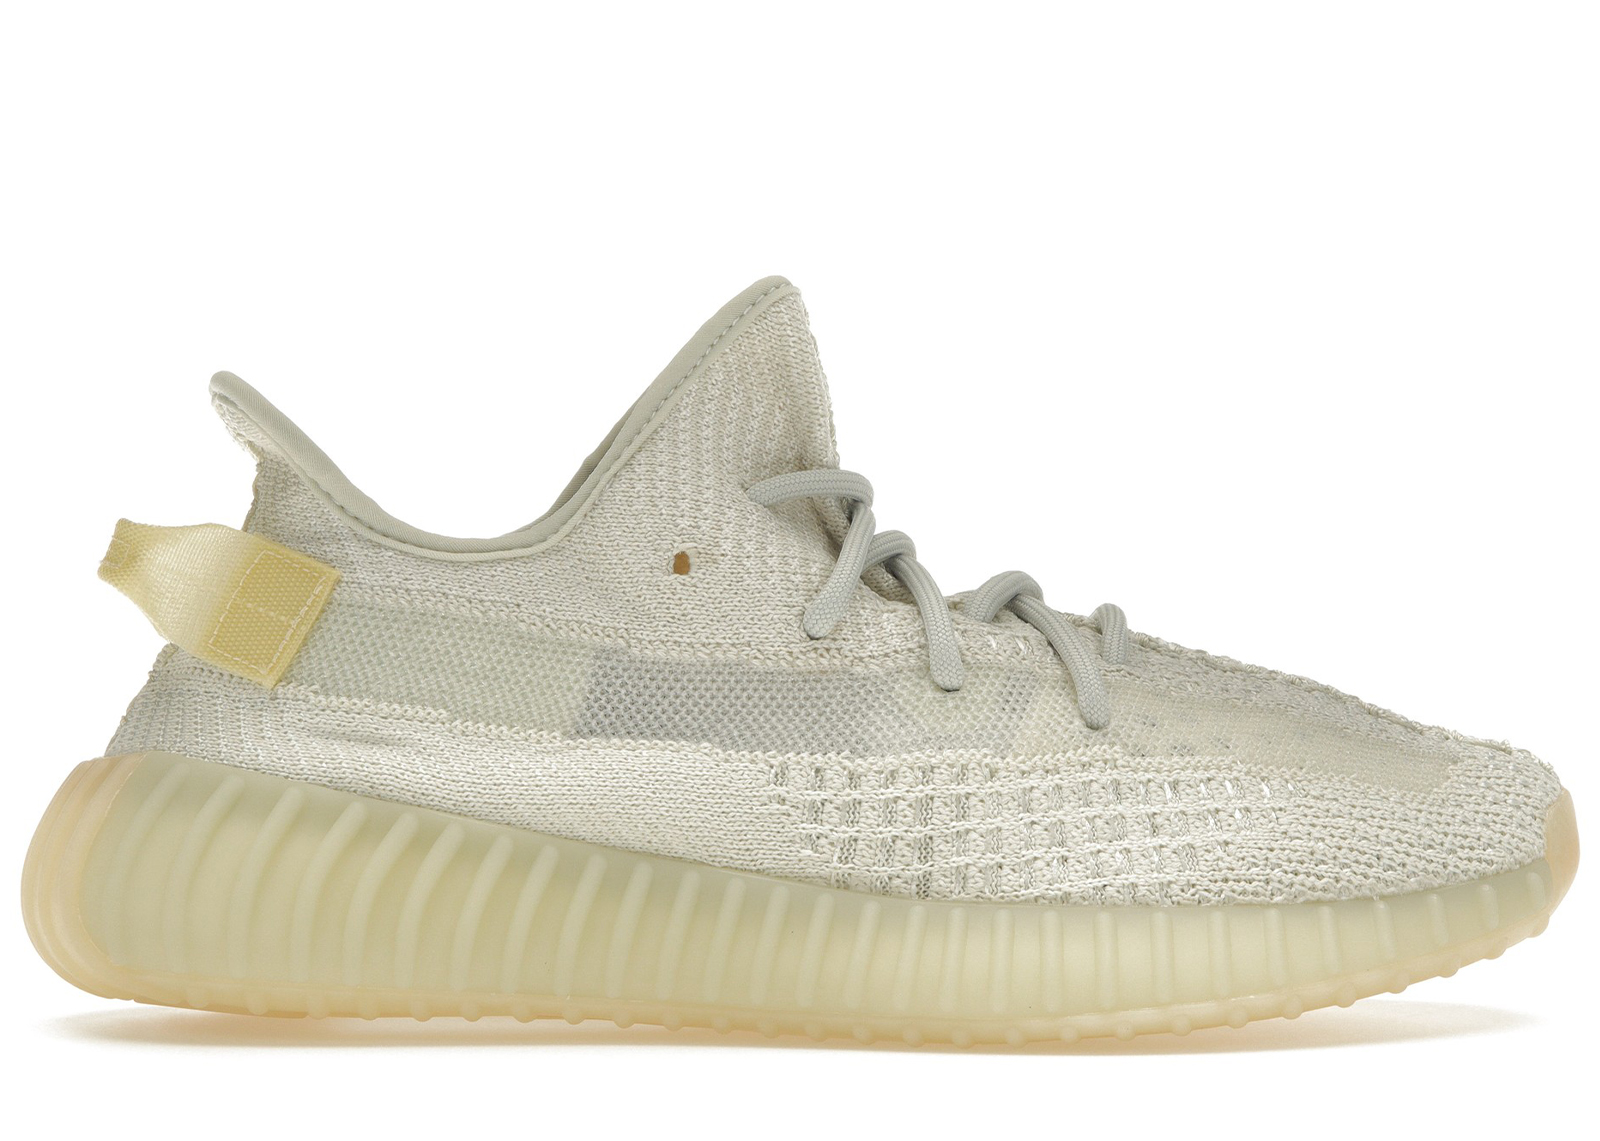 Adidas Yeezy Boost 350 V2 Light Shoes, 6